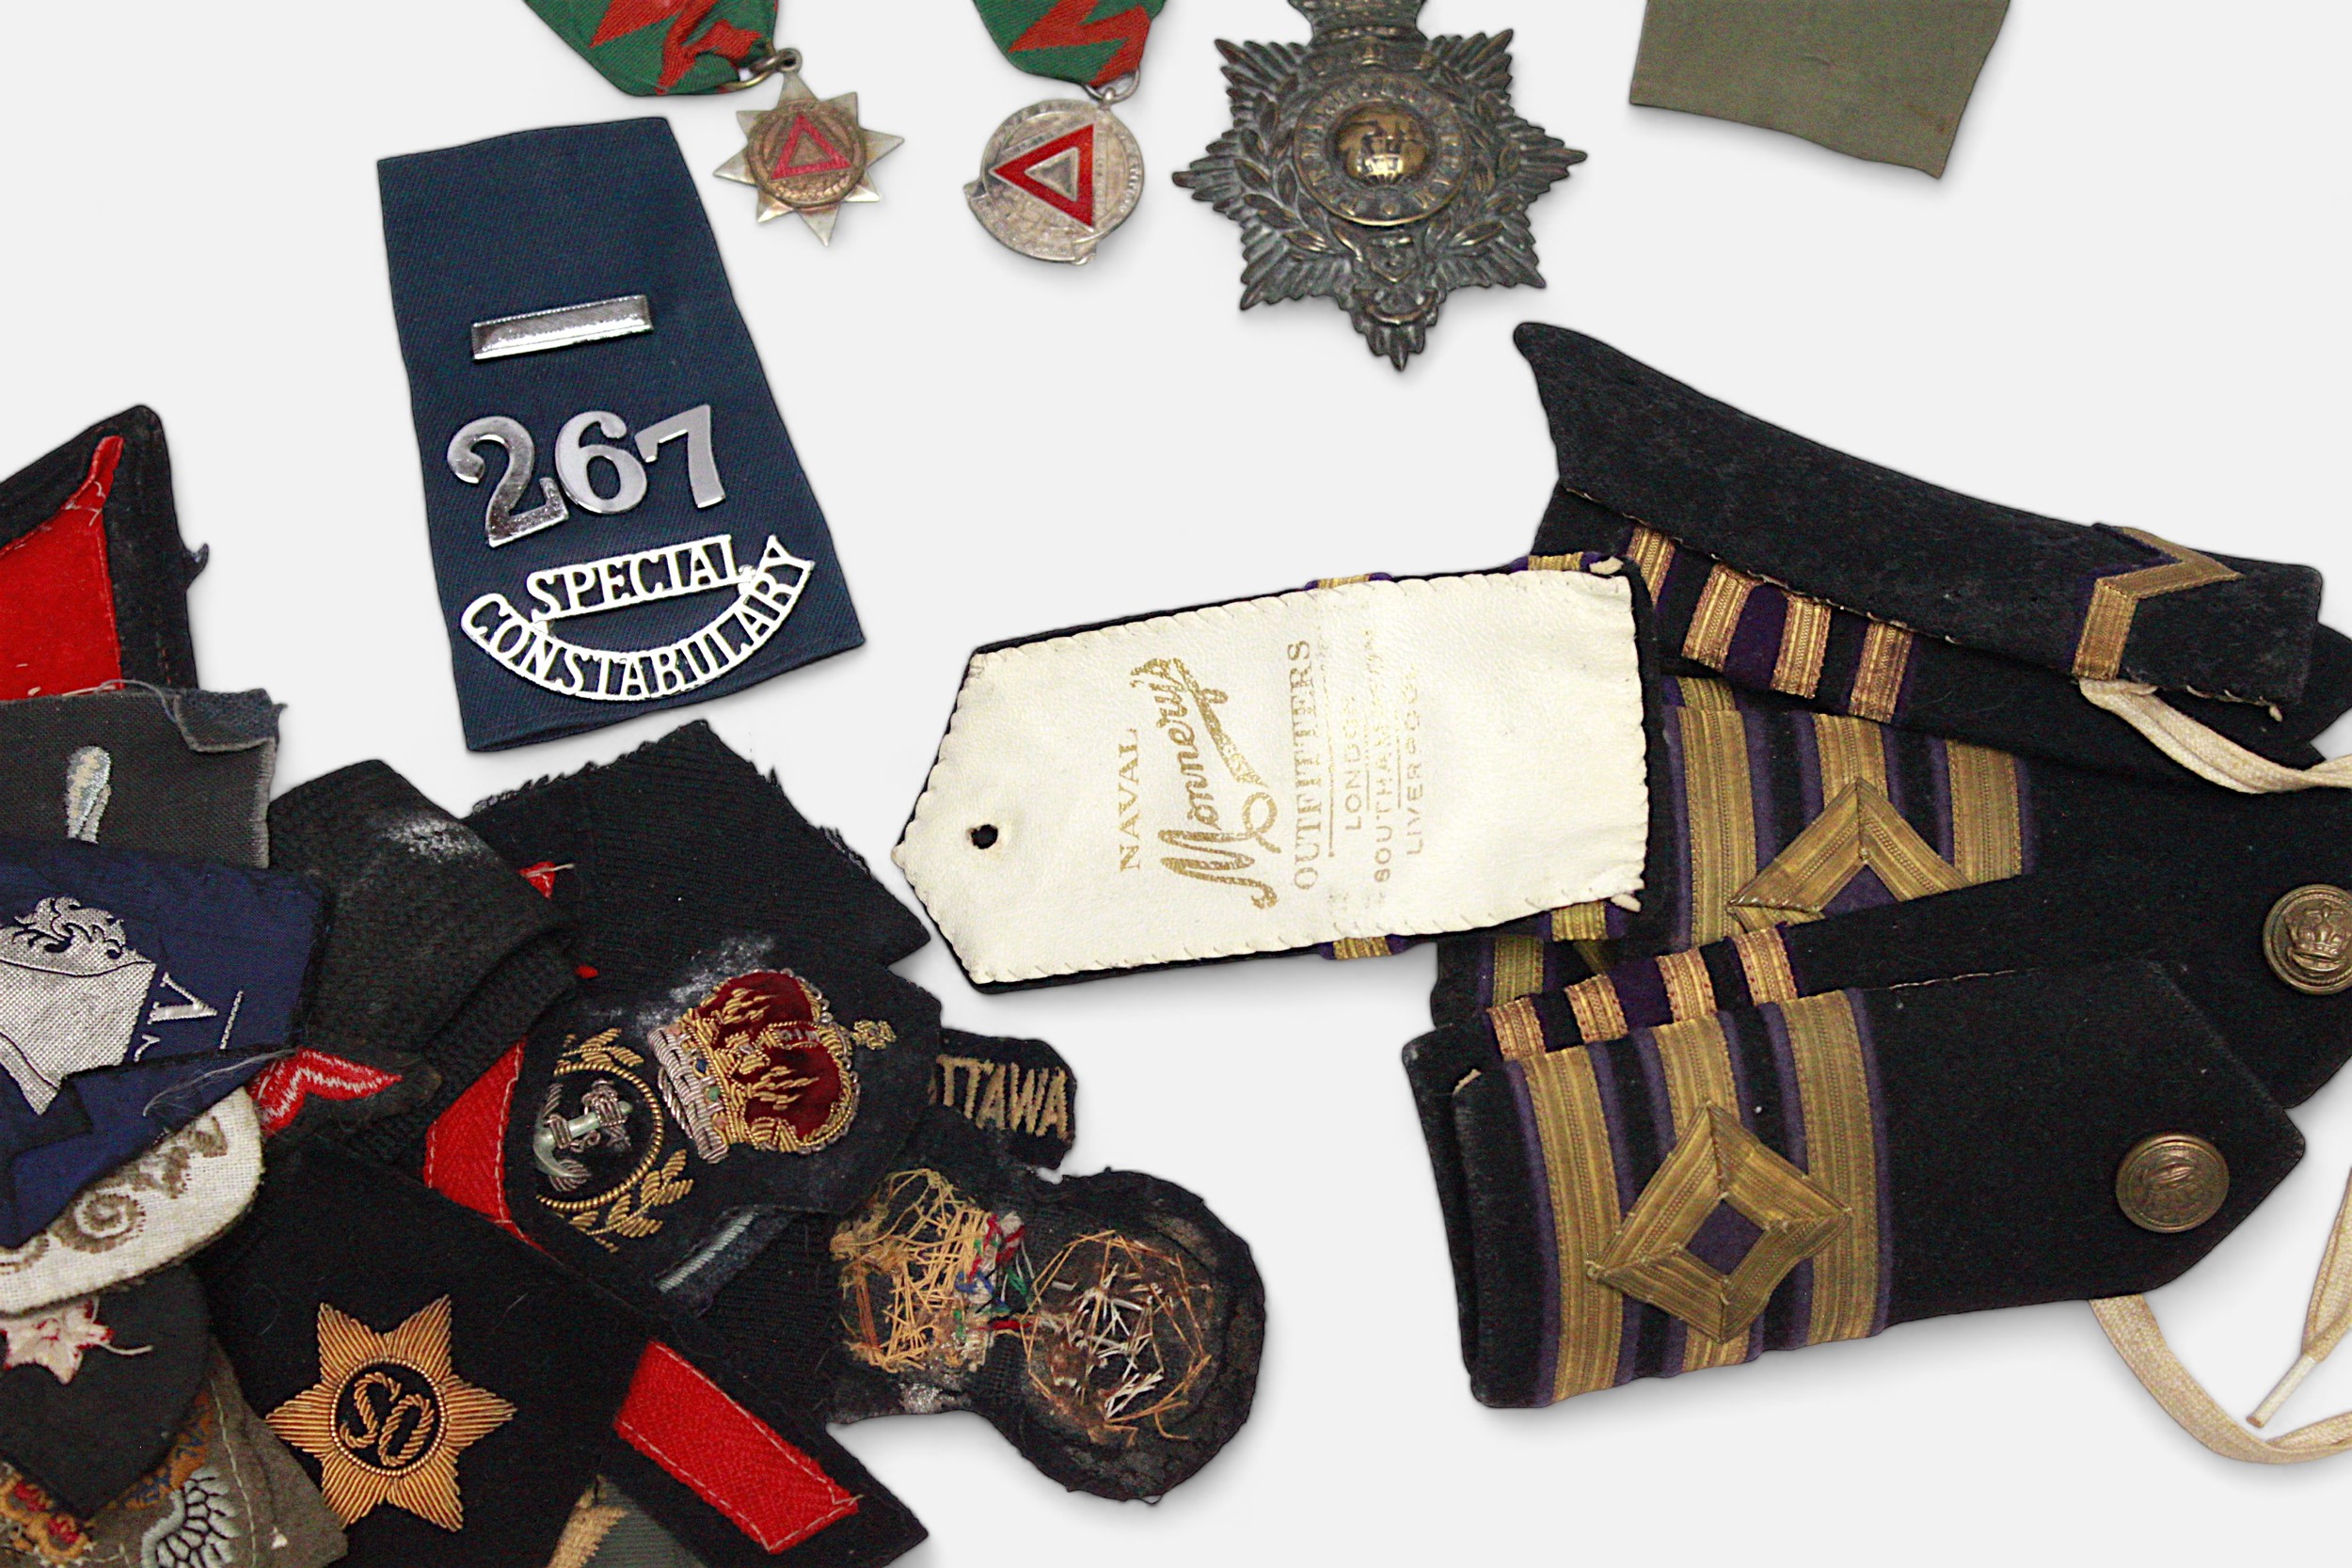 A large collection of various military cap and lapel badges, naval epaulettes, regimental buttons, - Image 3 of 5